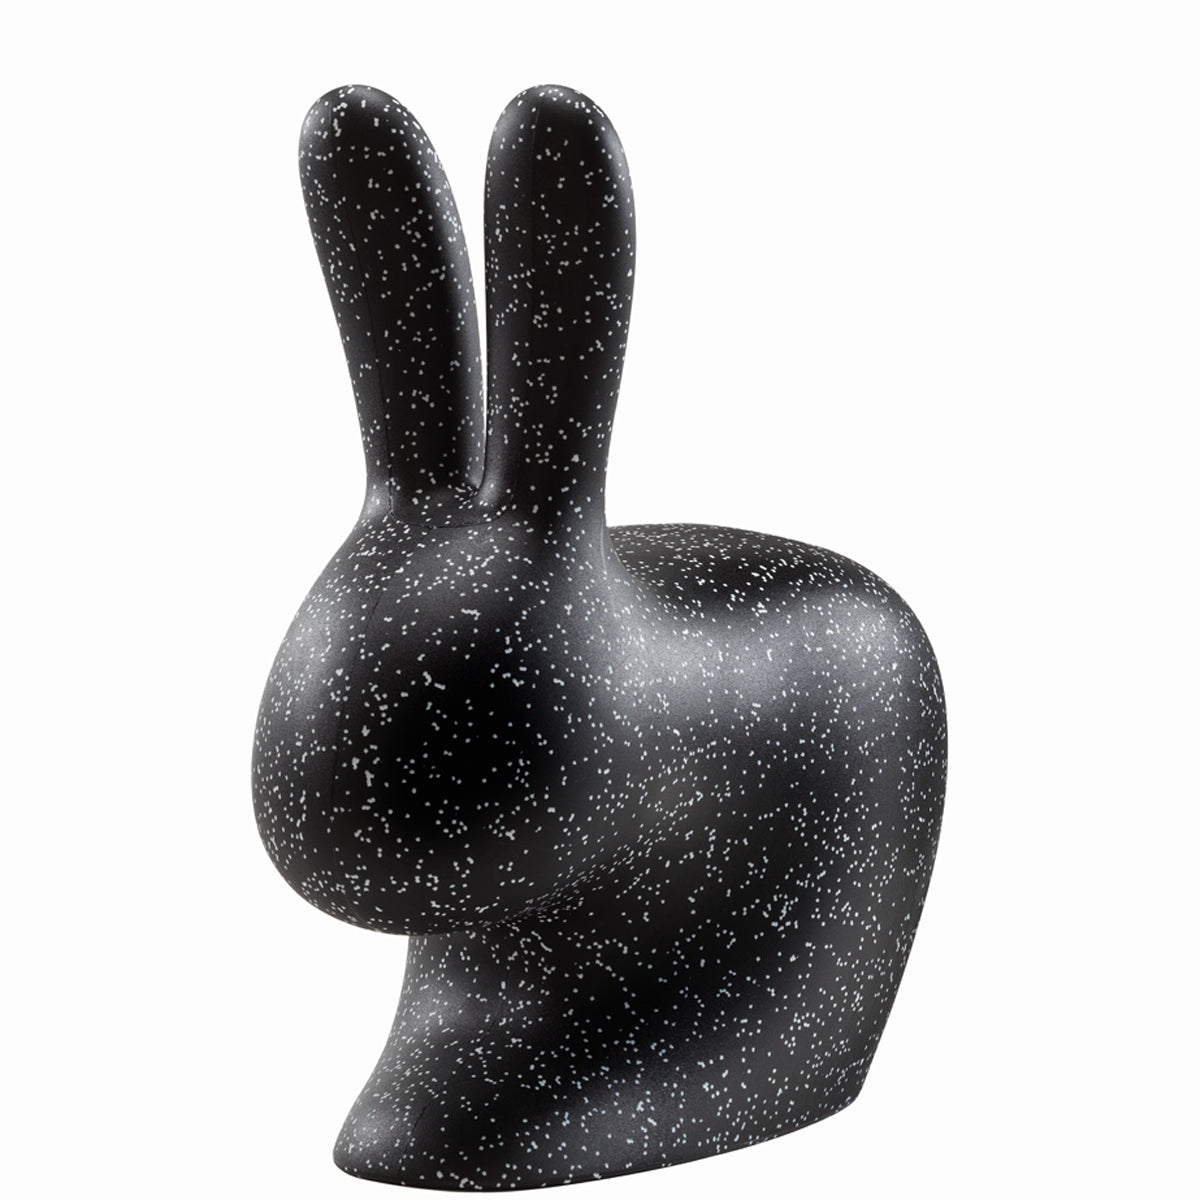 Rabbit Chair Dots Black and White - Qeeboo